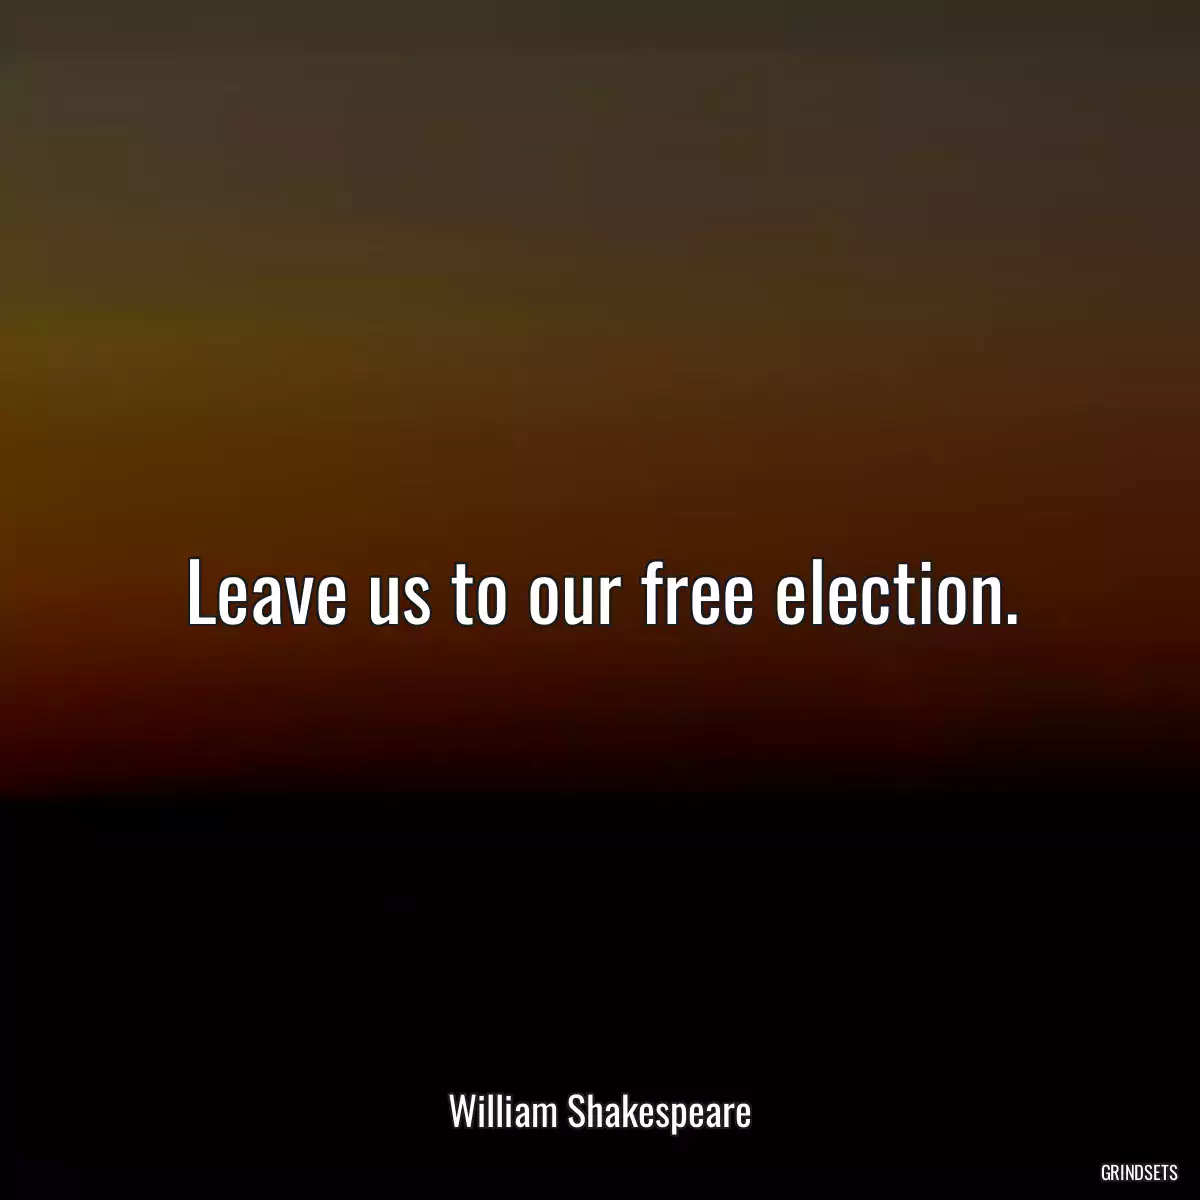 Leave us to our free election.